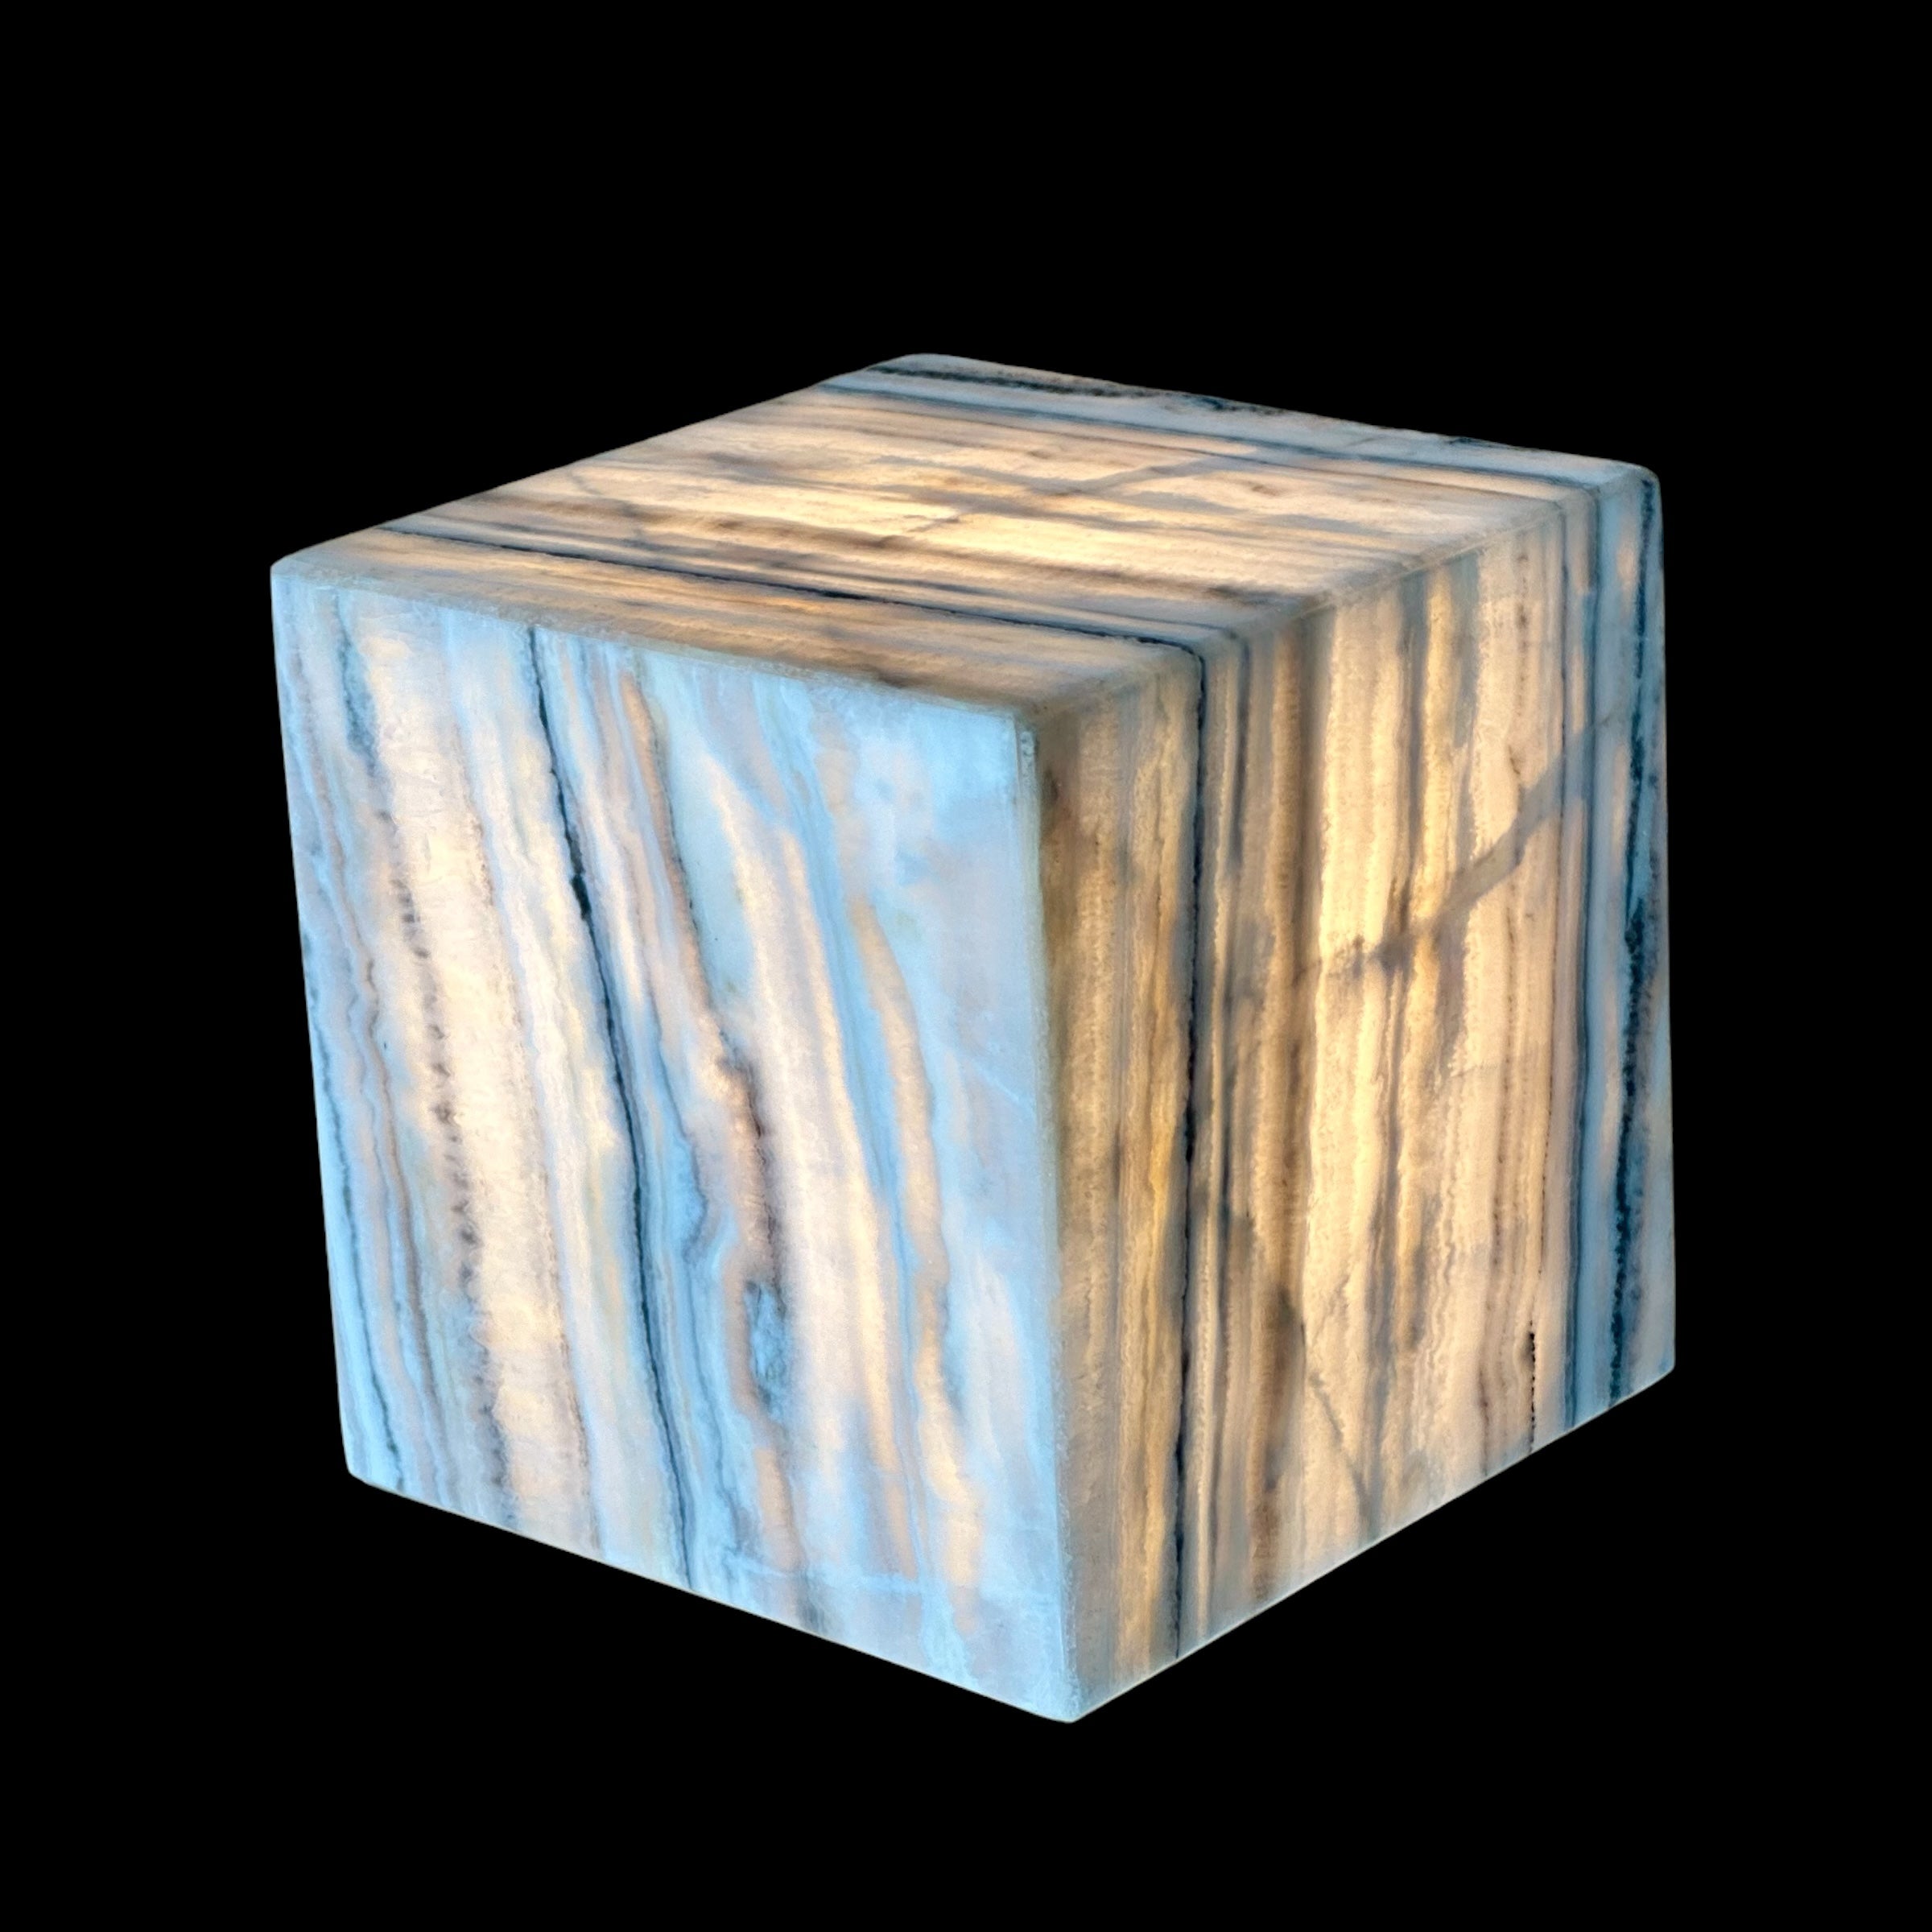 Grey and White Onyx Cube